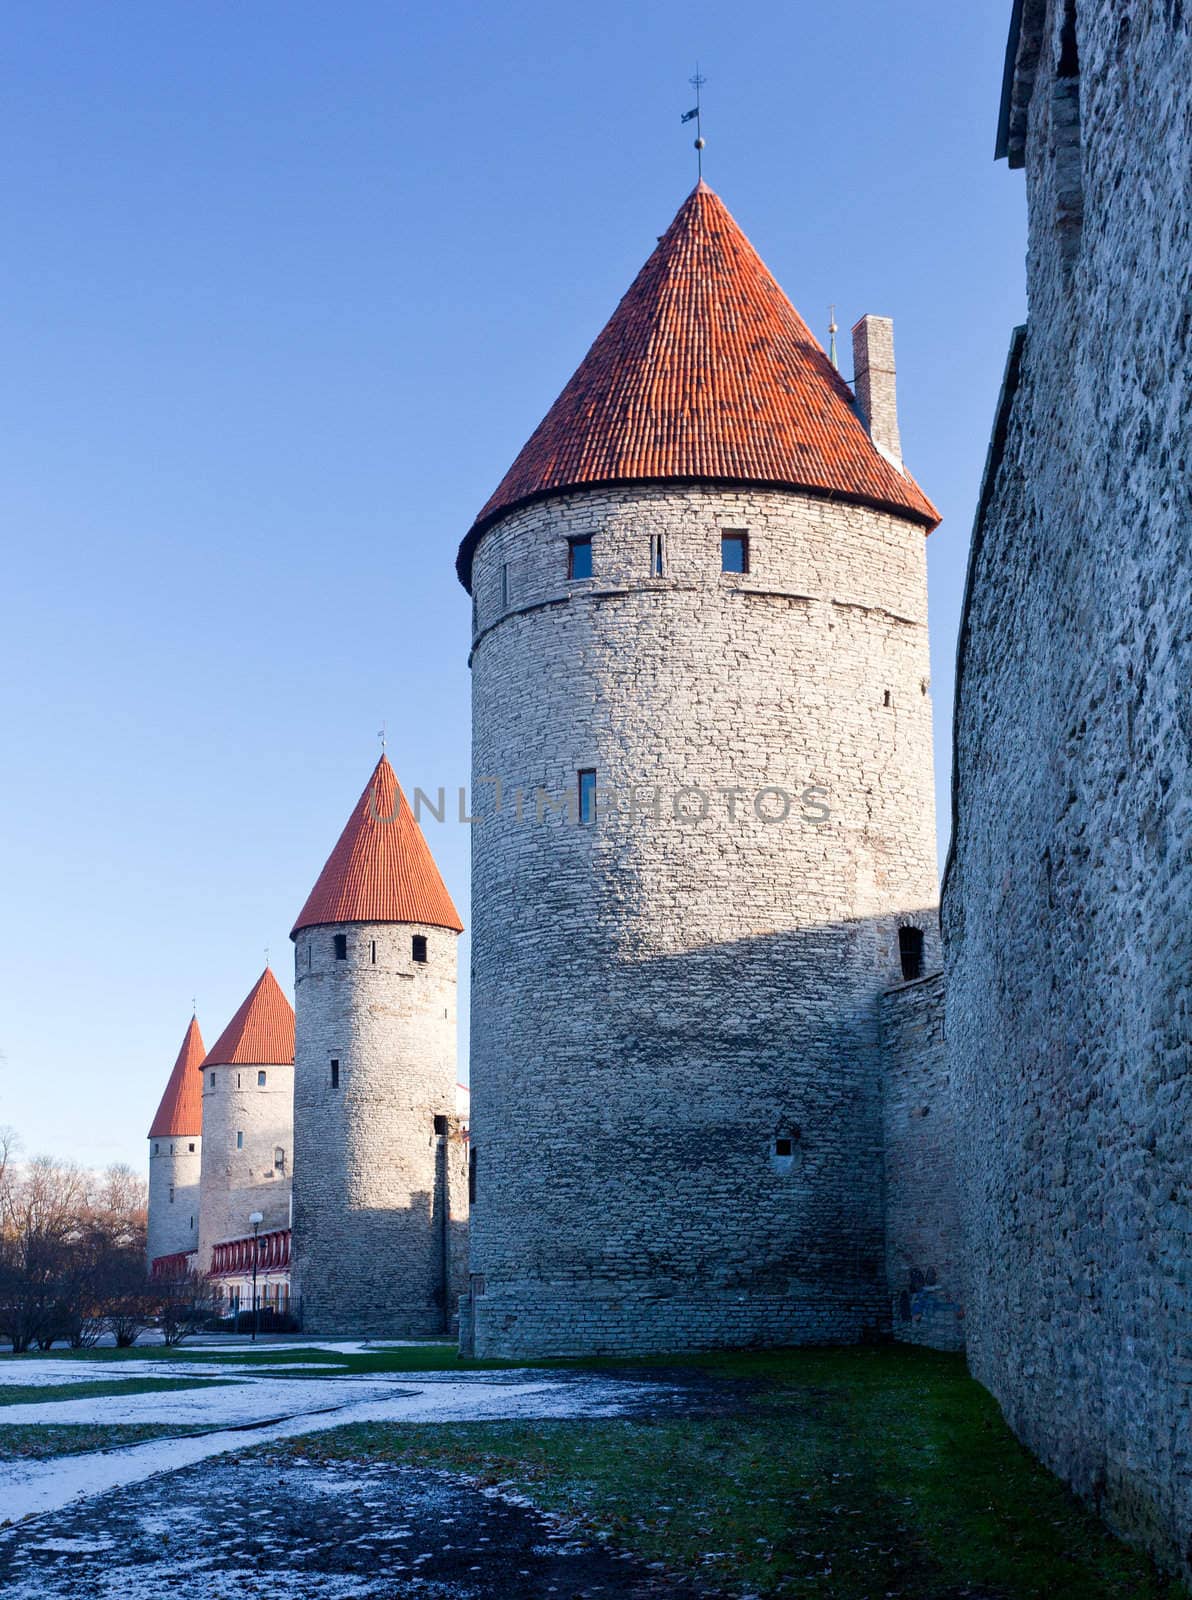 Ancient stone walls of Tallinn with four towers in alignment